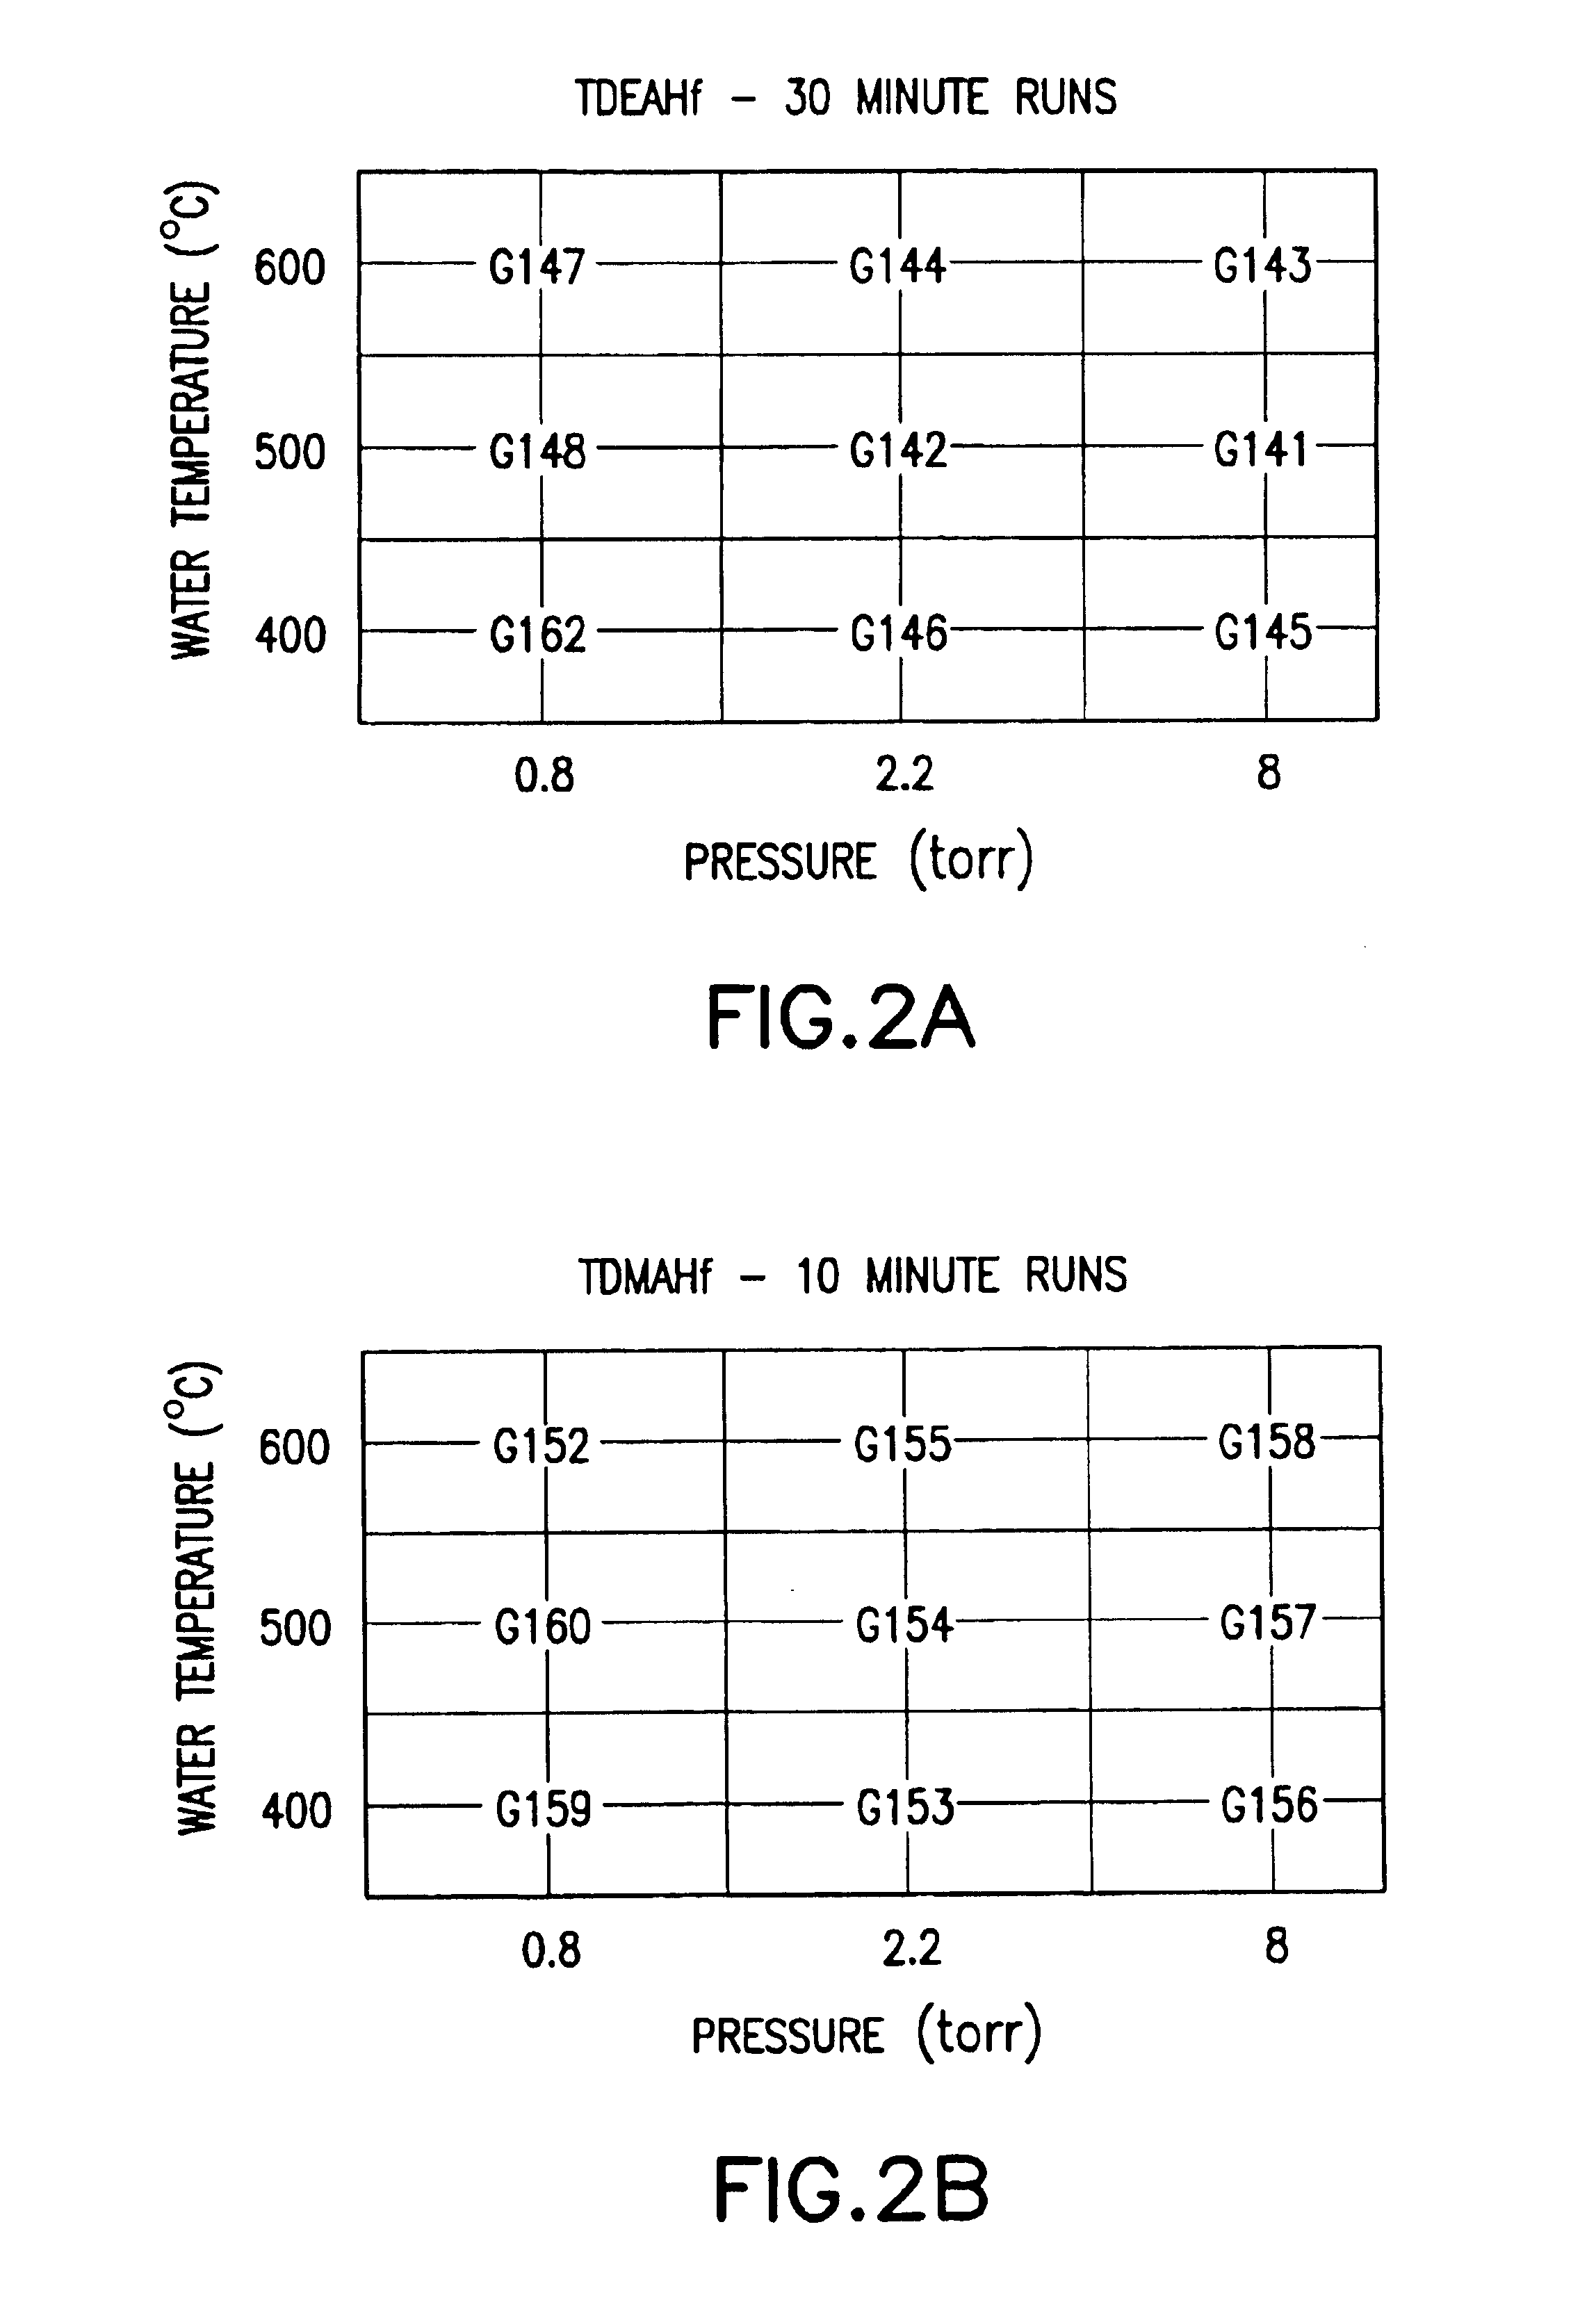 Source reagent compositions for CVD formation of gate dielectric thin films using amide precursors and method of using same